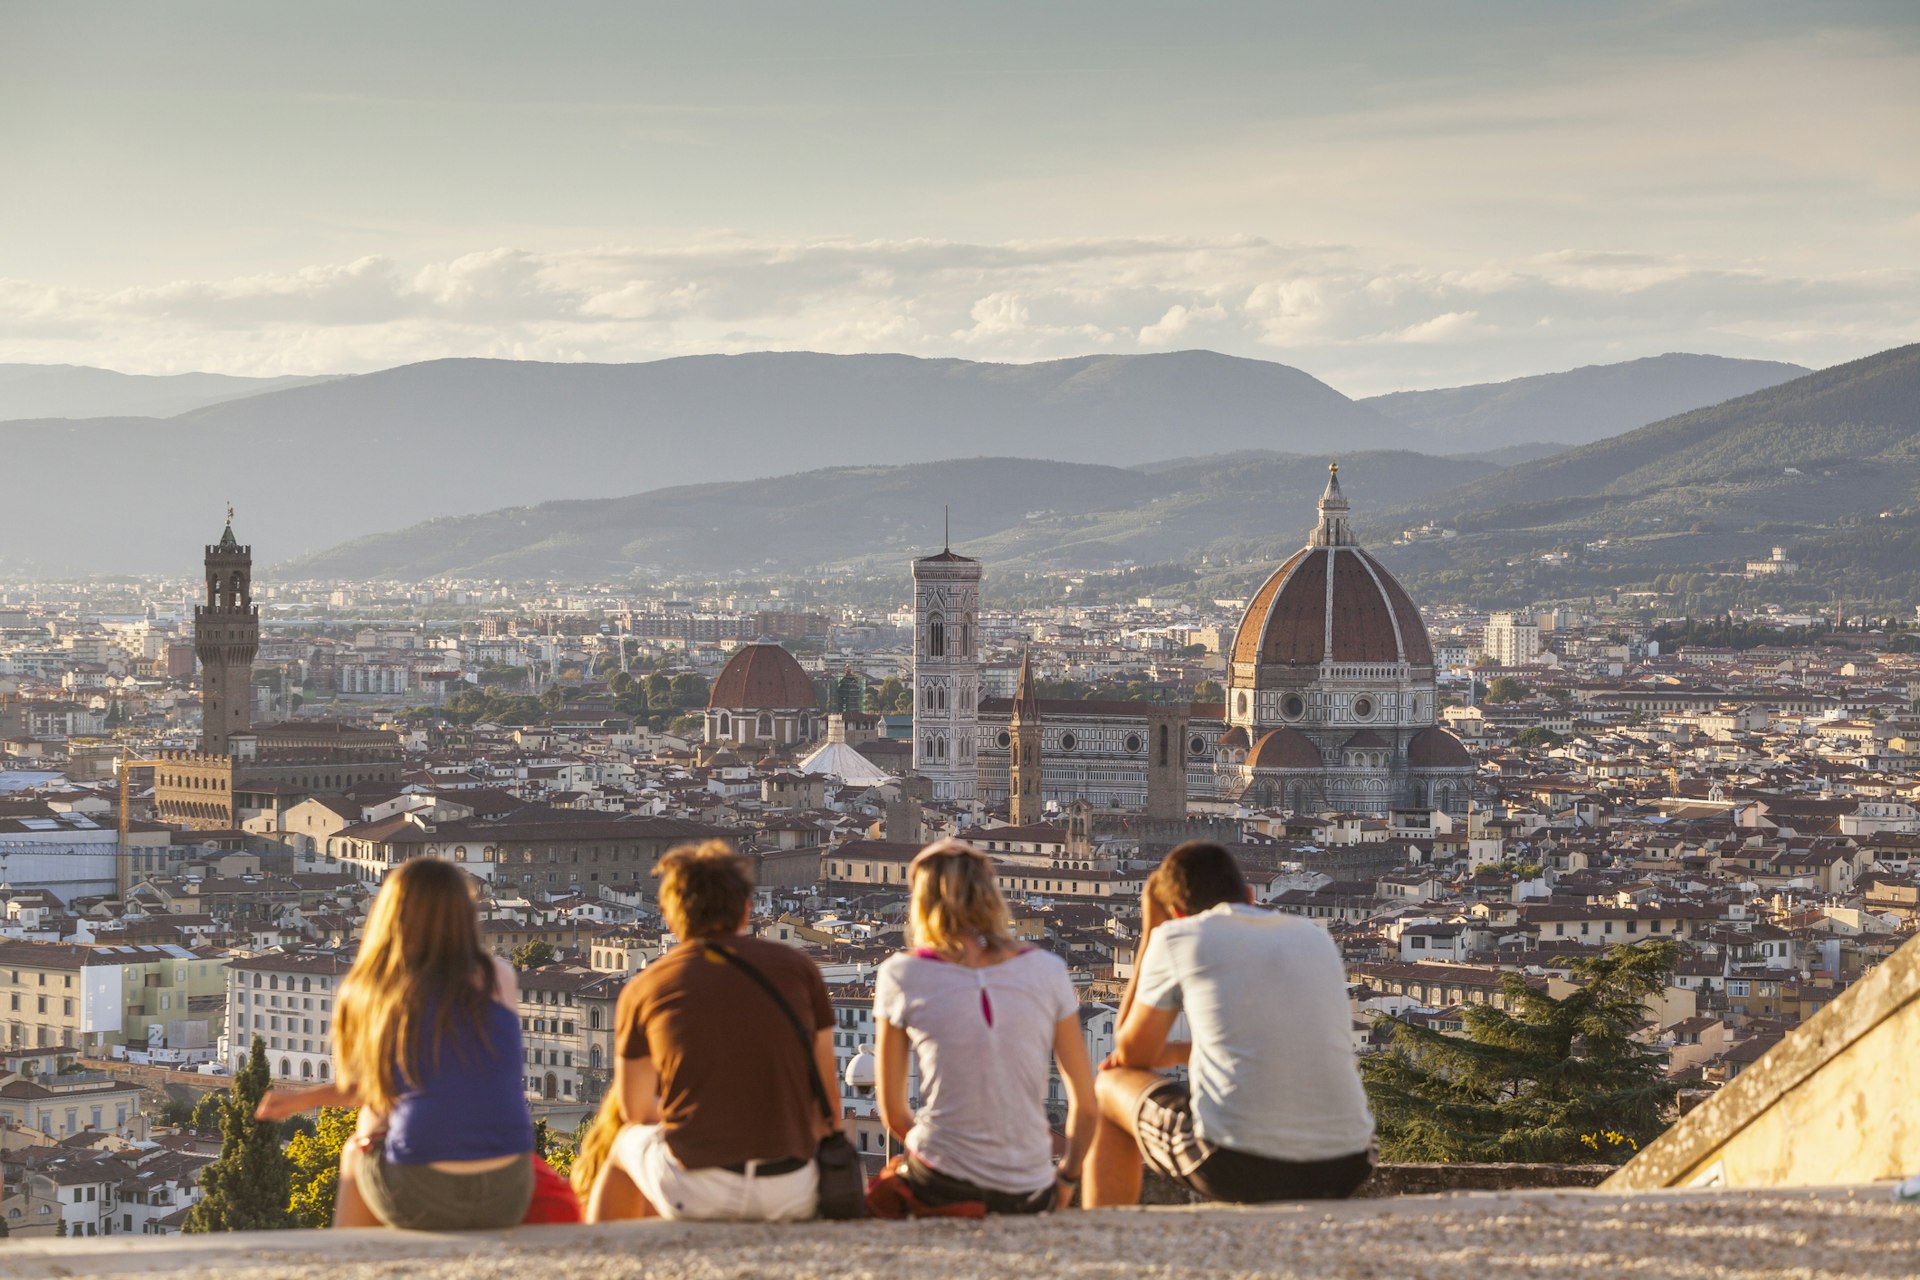 A group of four people sit at a viewpoint looking out over a city. The skyline is dominated by a huge domed church